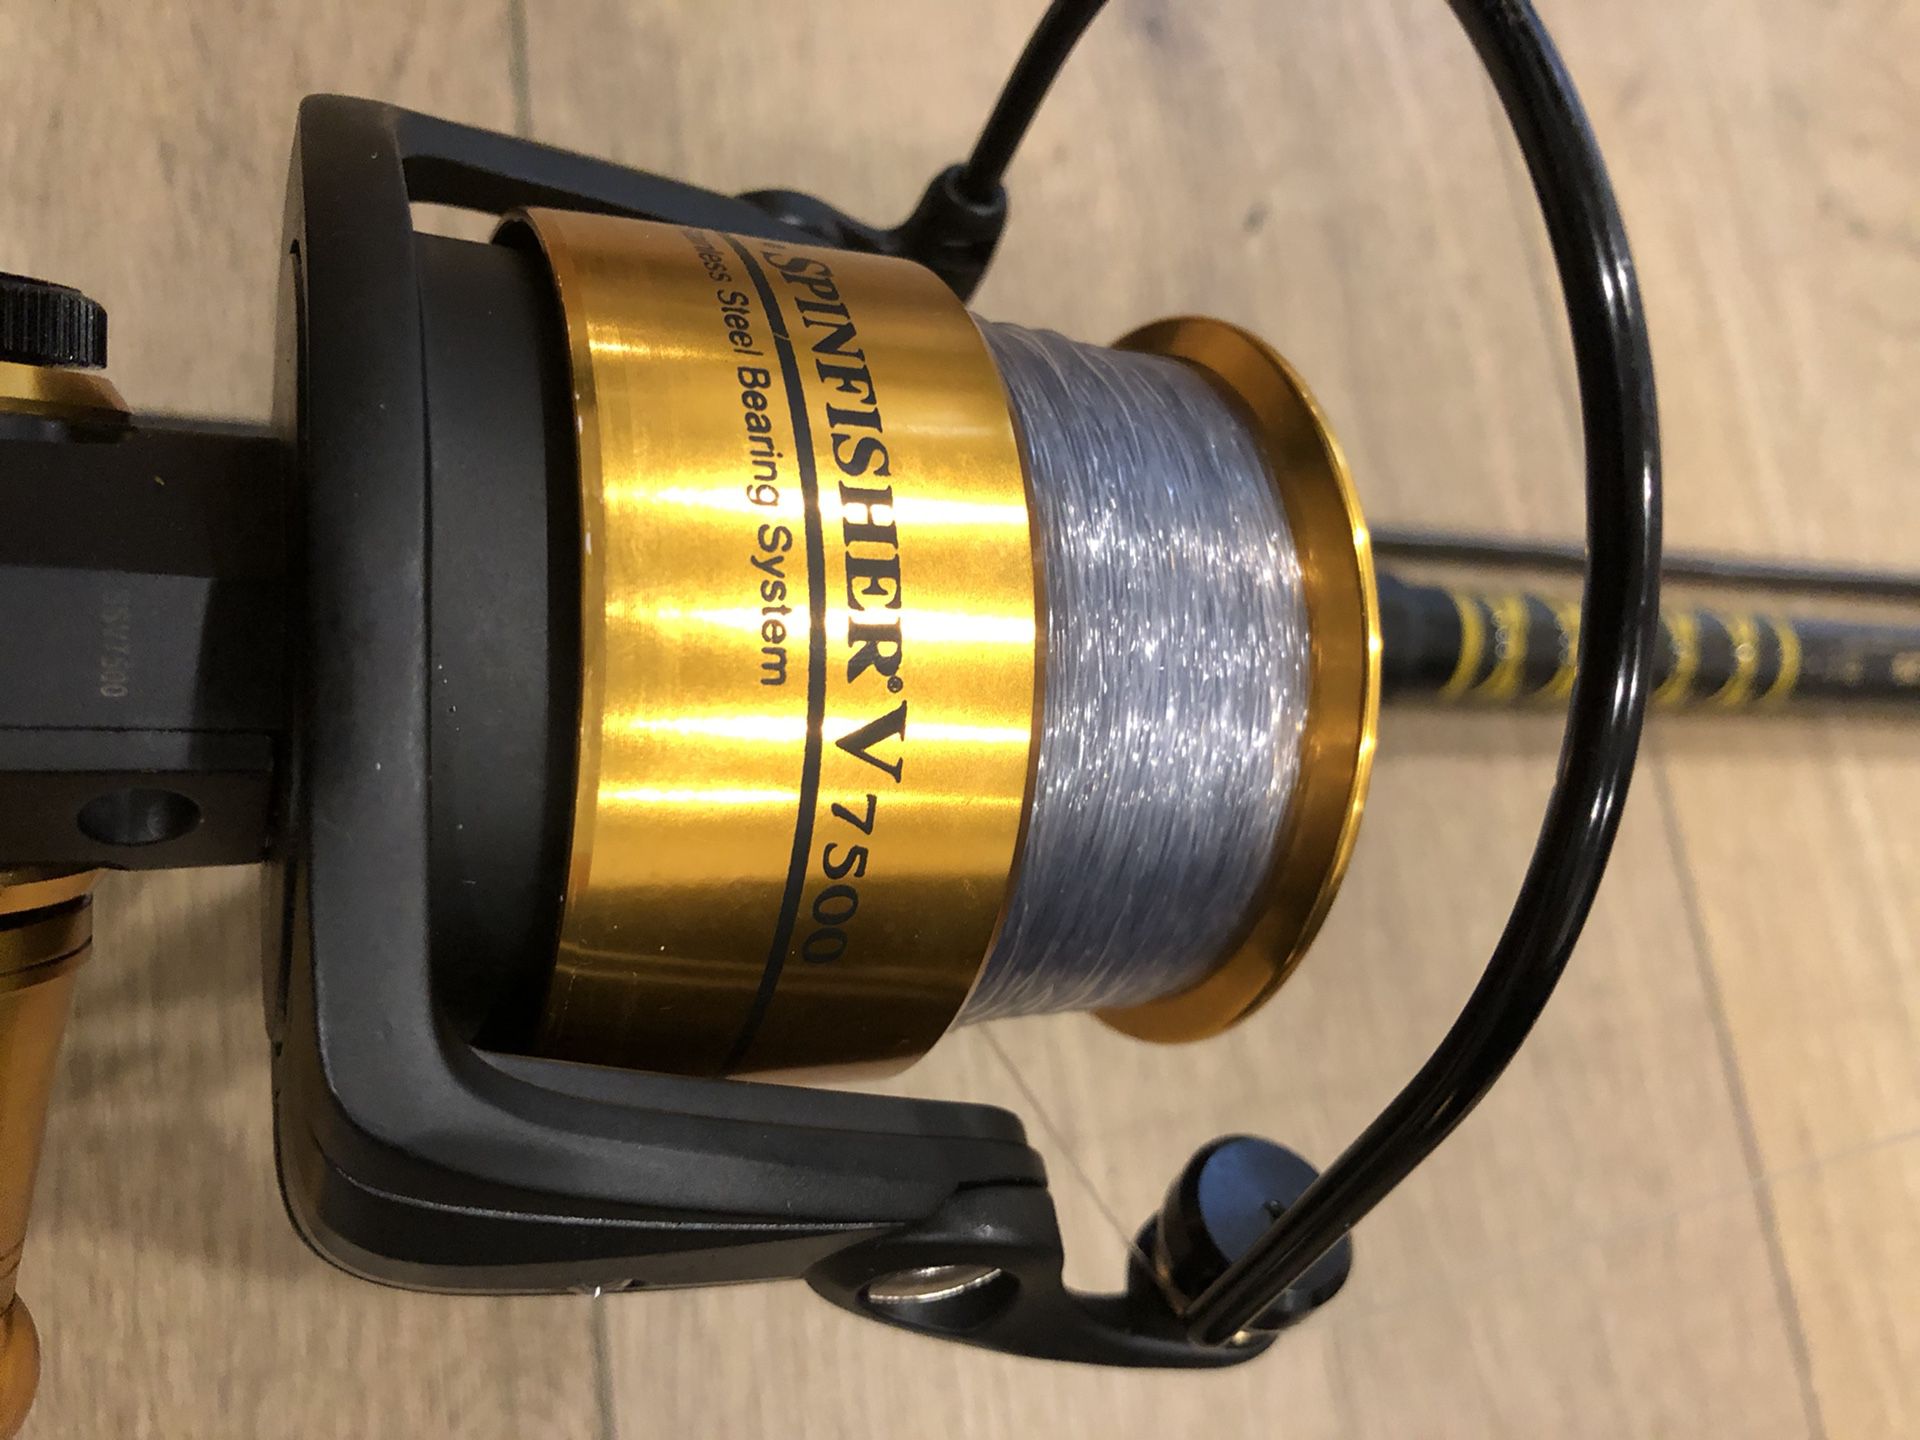 2 Penn spinner fish 6500 and 7500 reels and rods